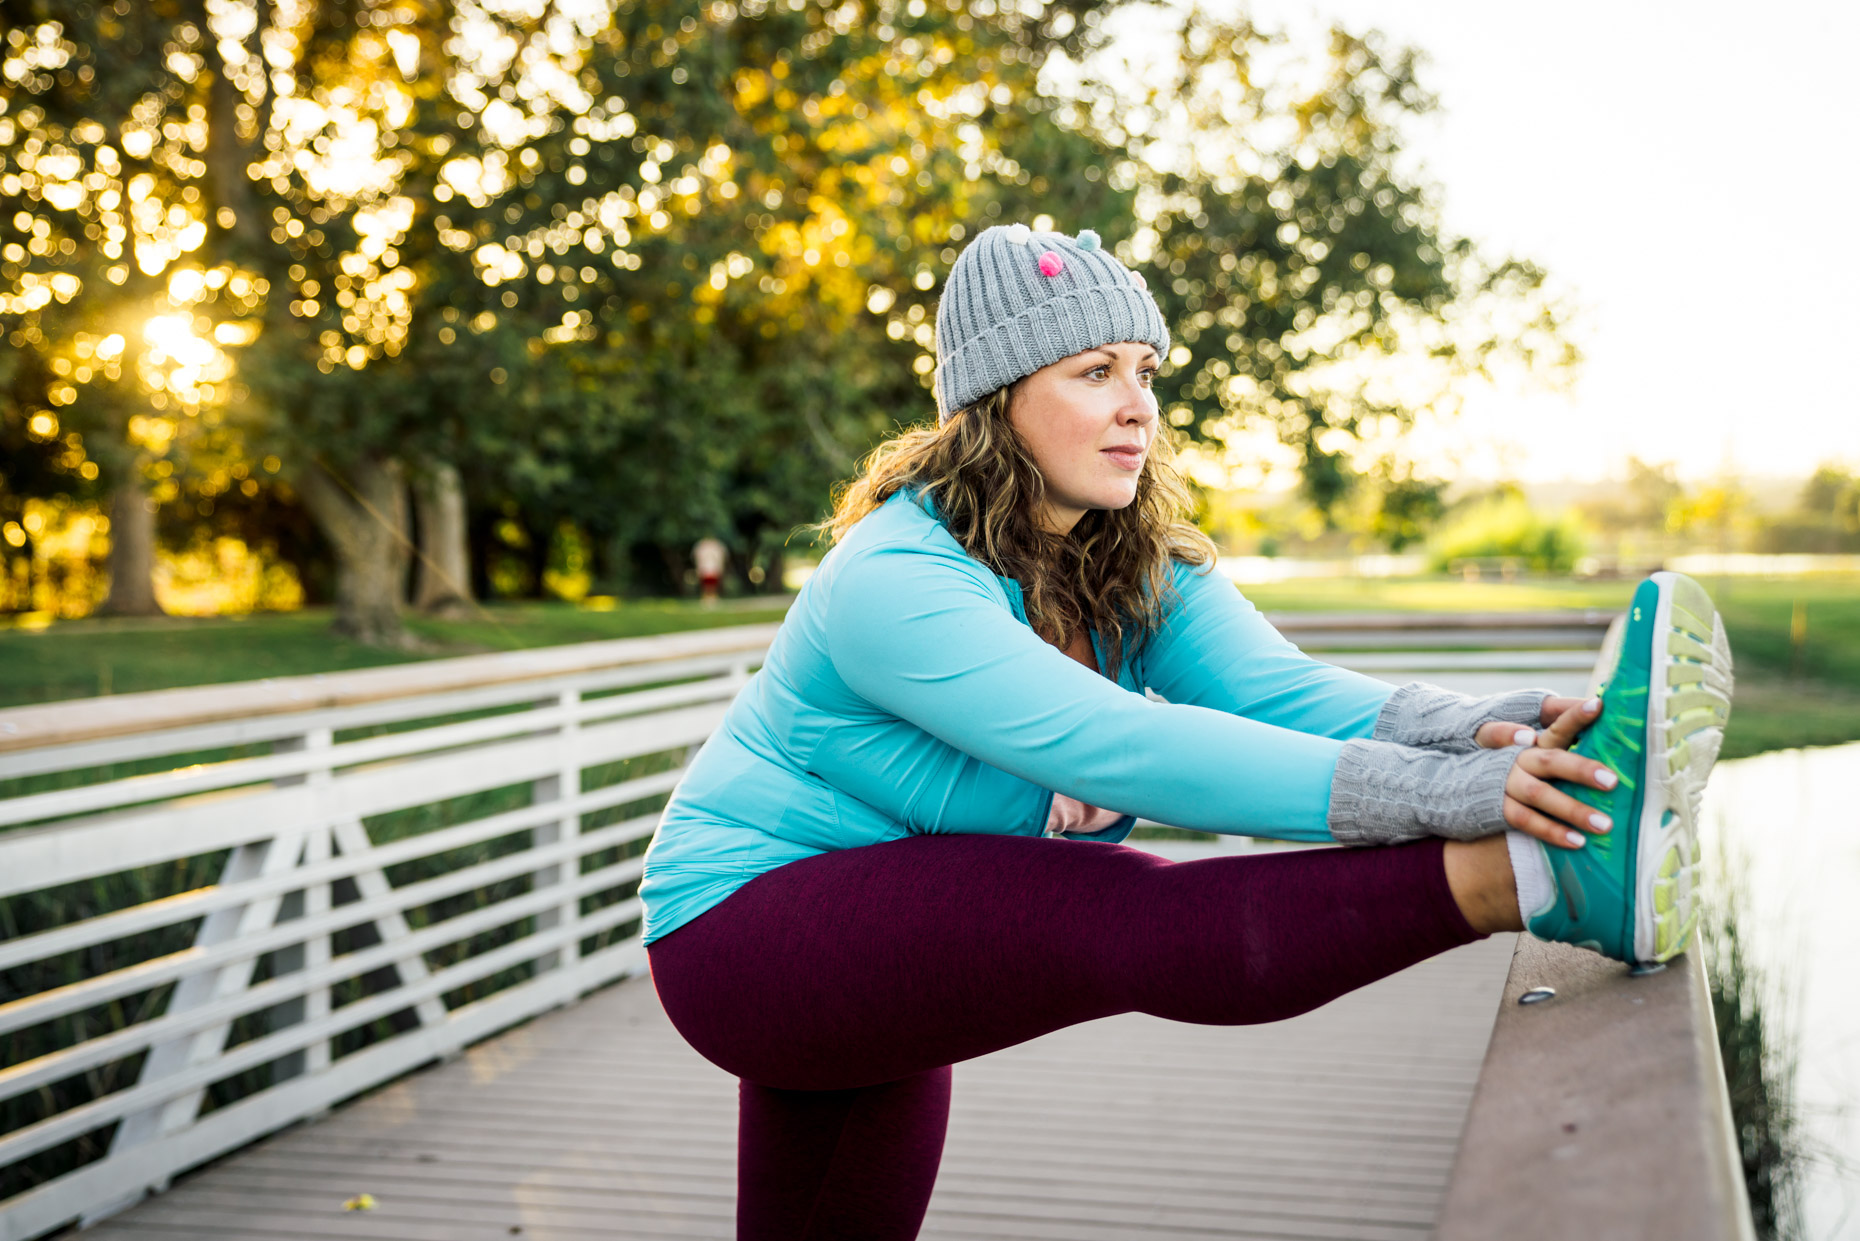 Plus-sized woman in fitness attire and hat stretching on bridge in park in fall